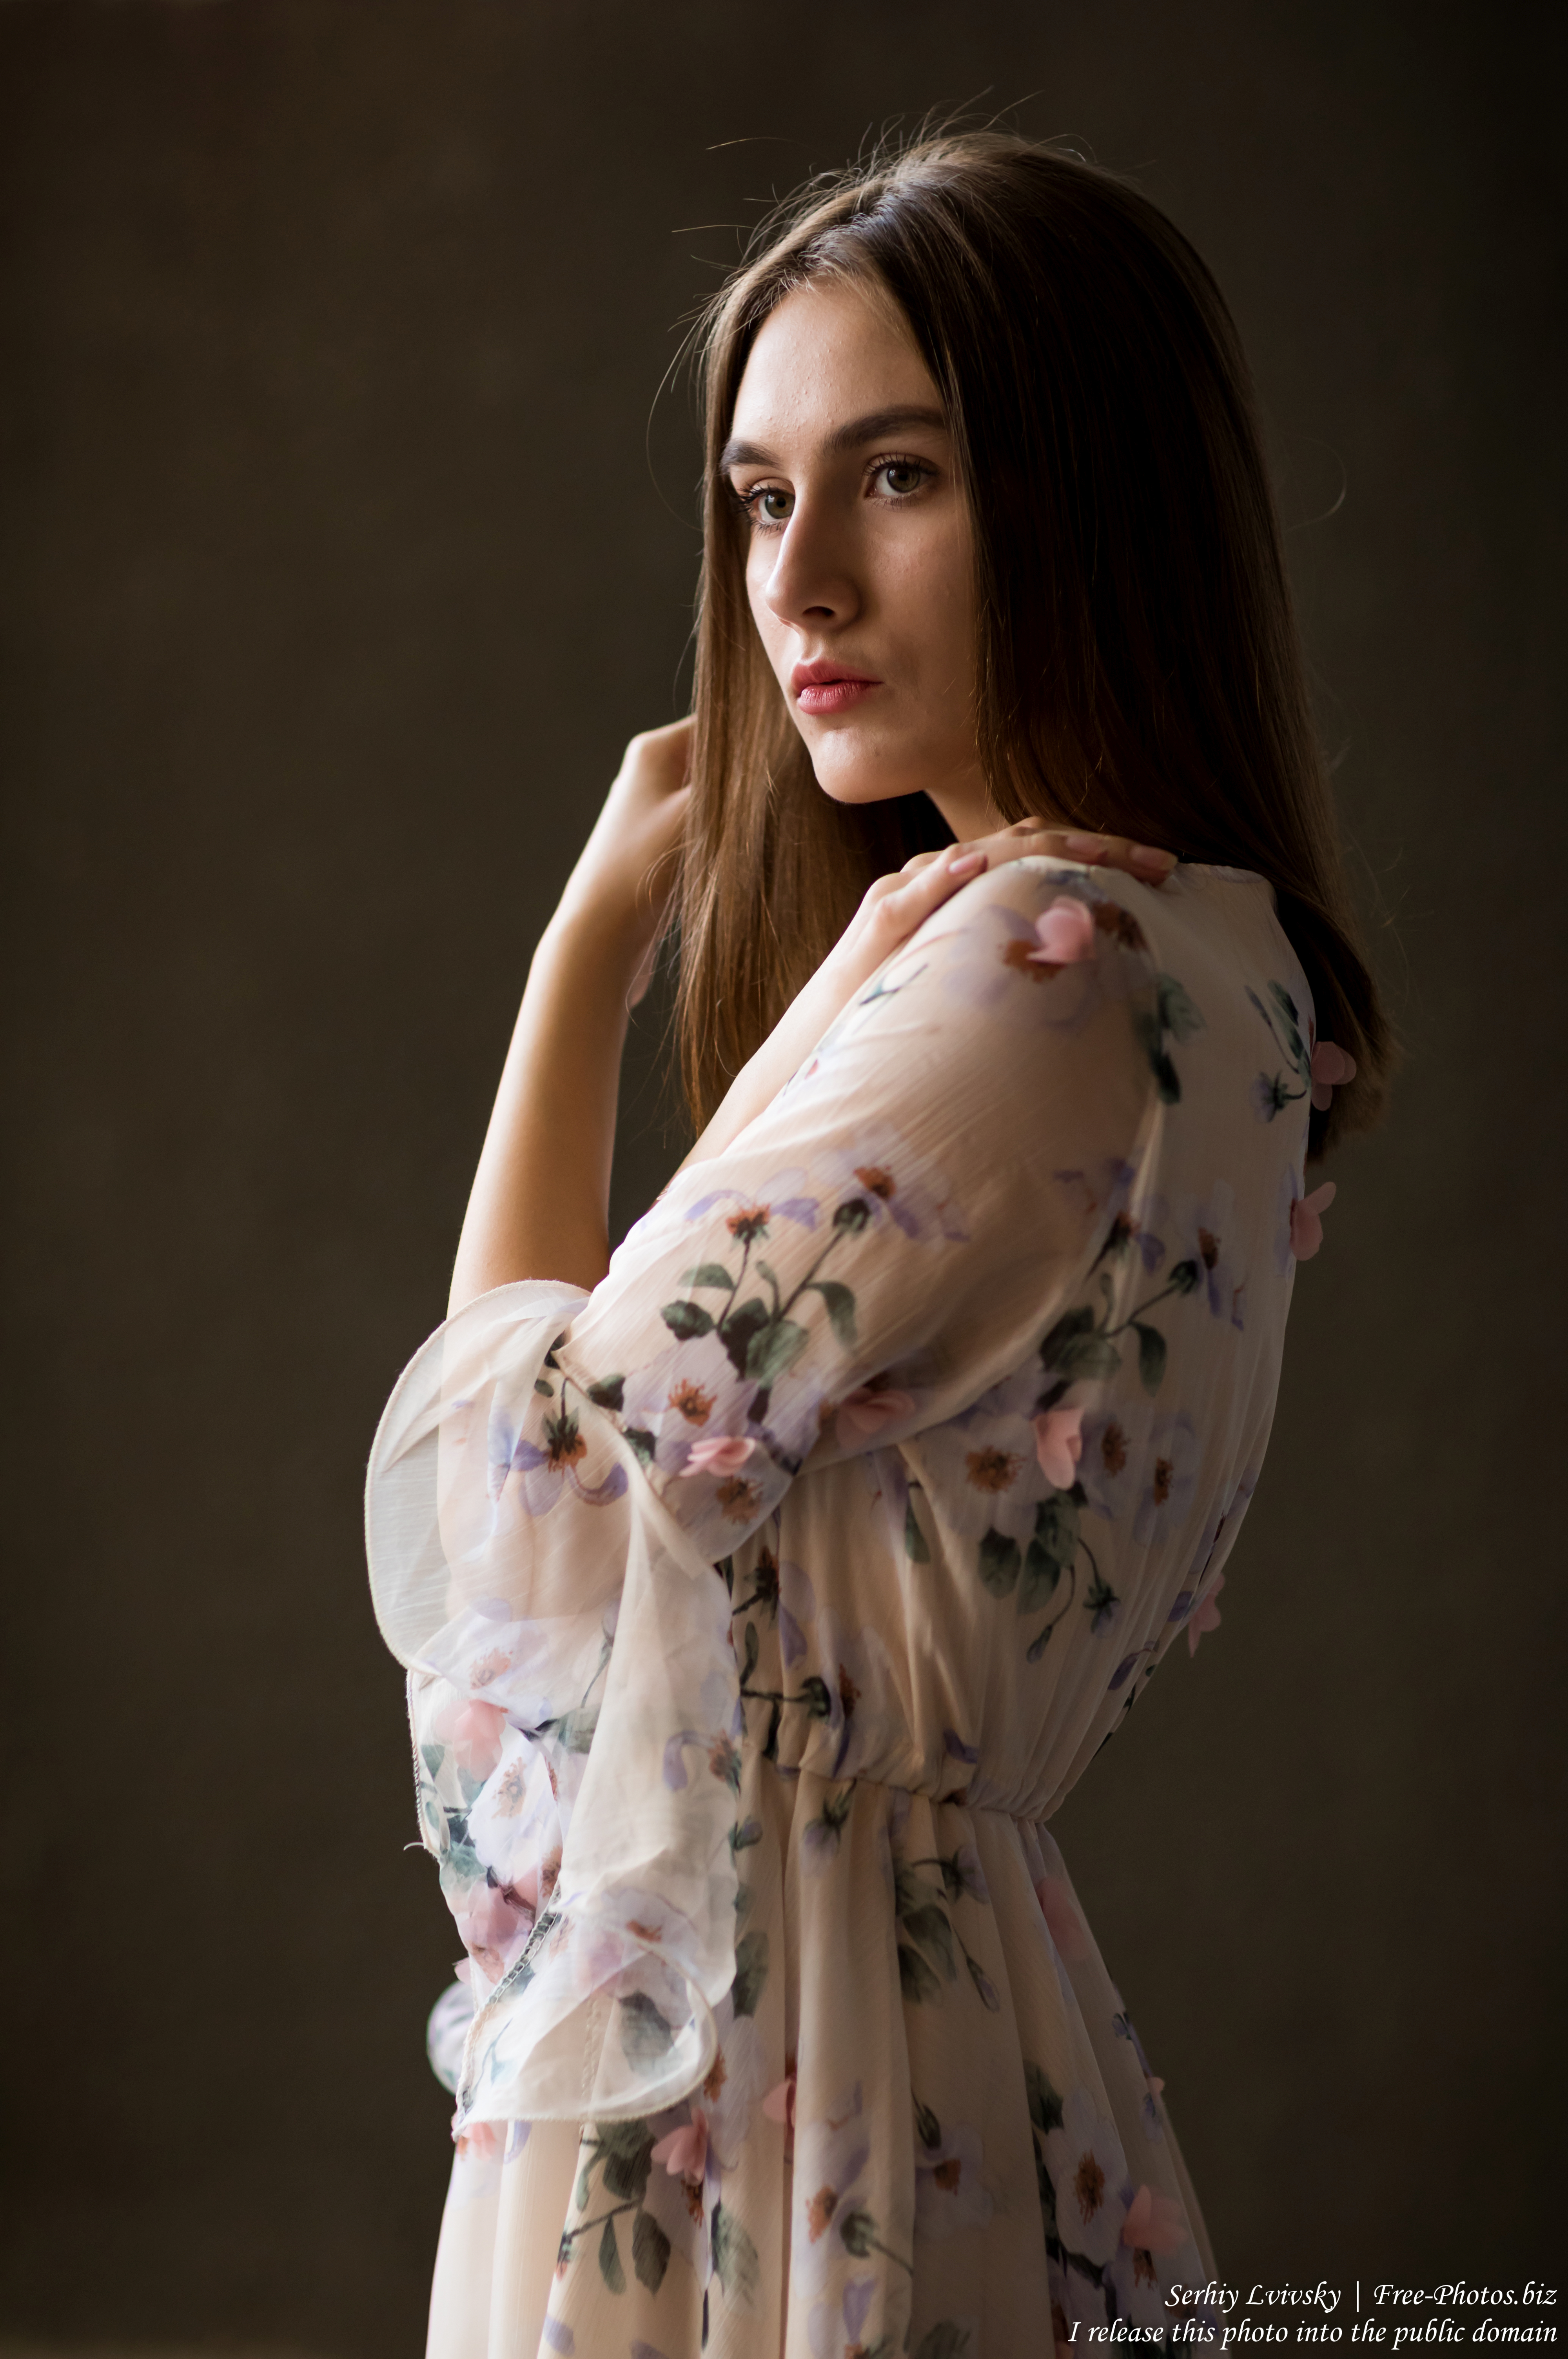 julia_a_15-year-old_girl_photographed_in_july_2019_by_serhiy_lvivsky_14